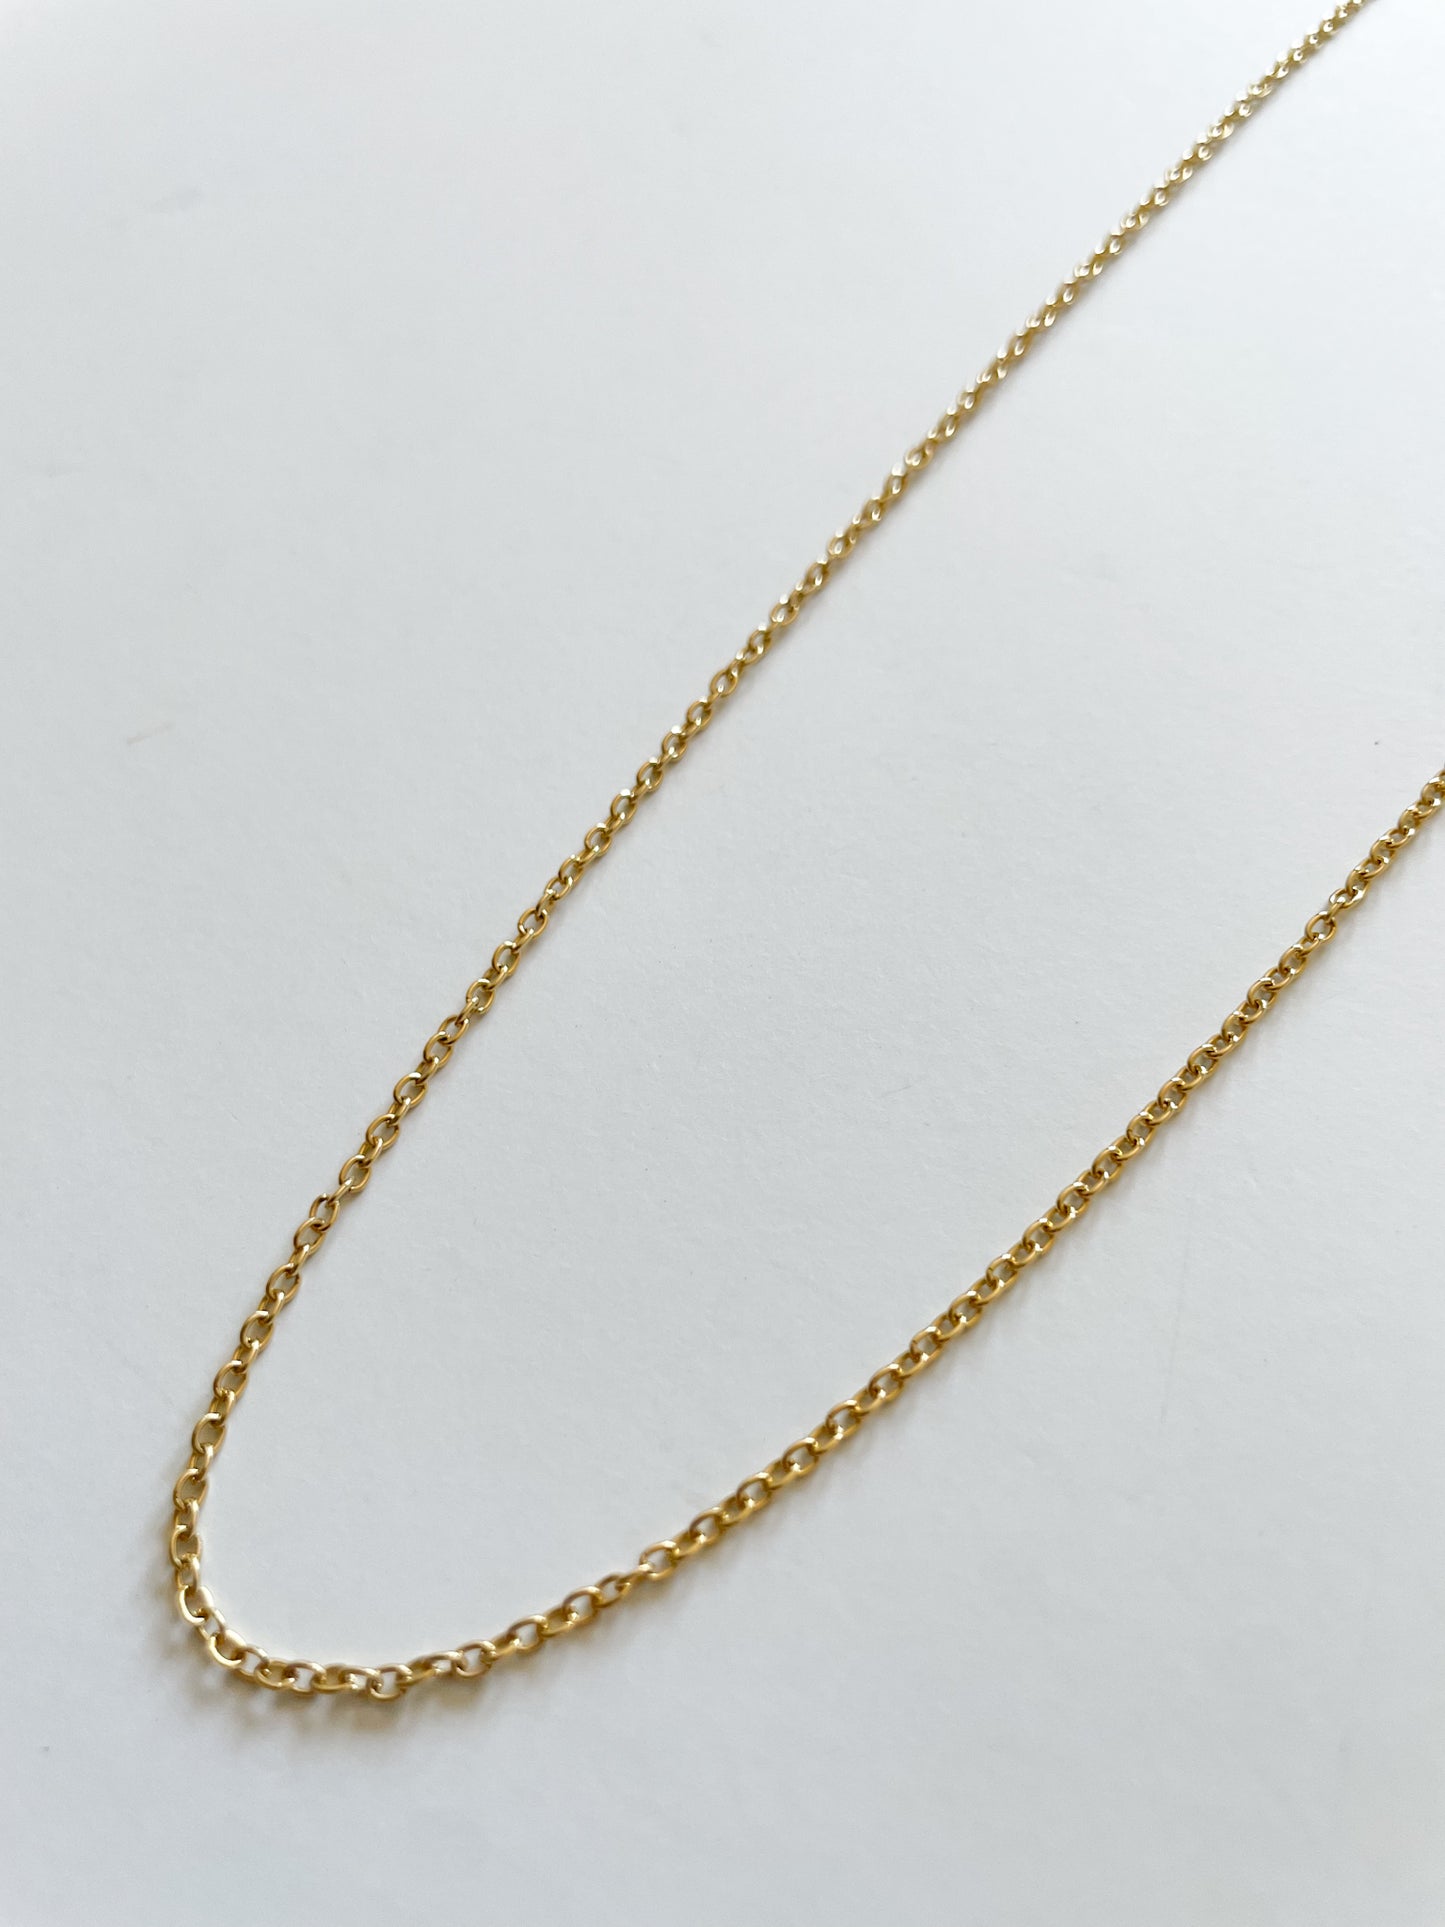 Delicate Gold Shiny Chain Necklace